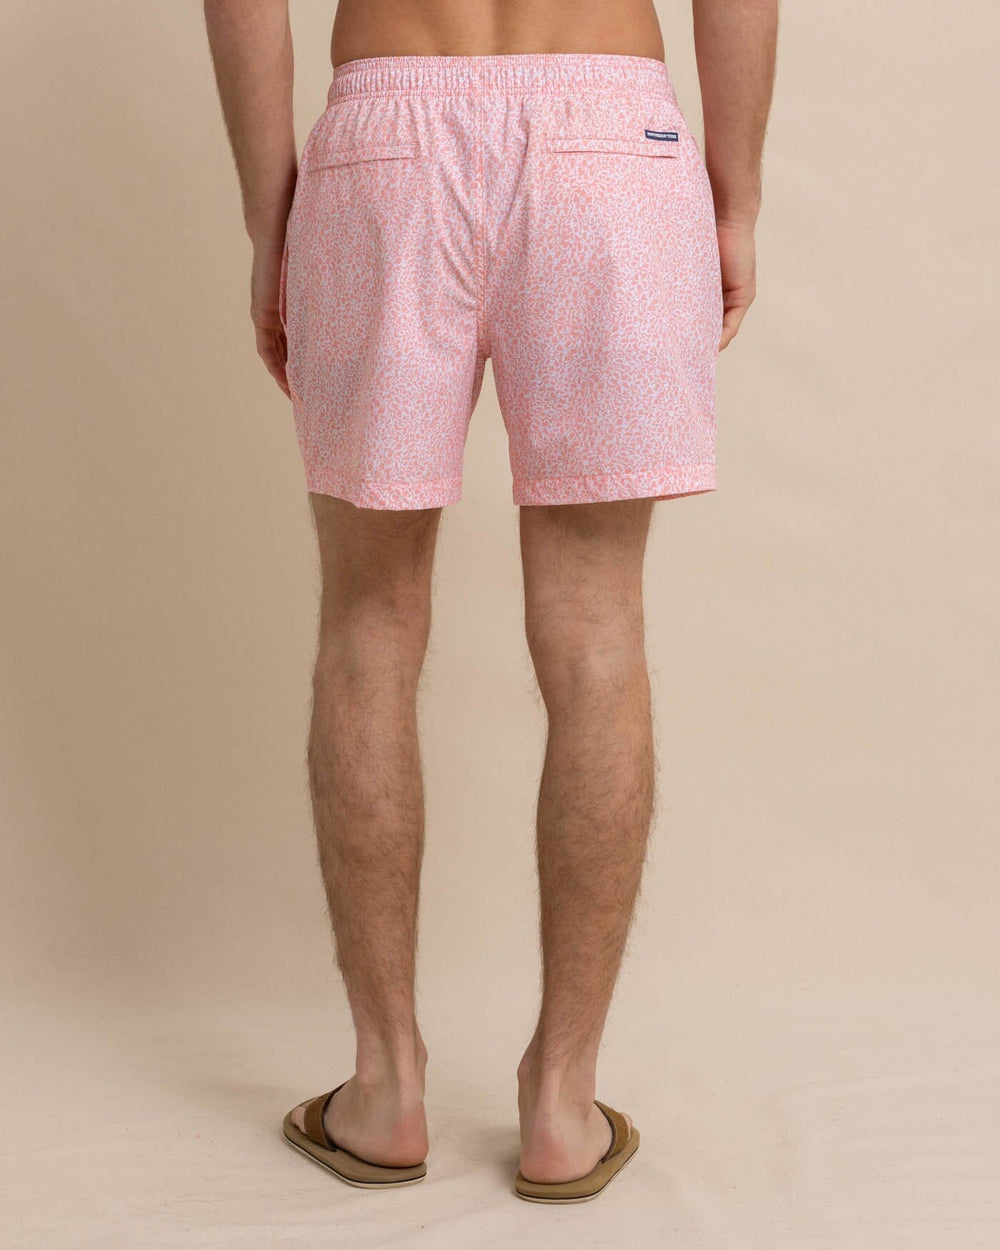 The back view of the Southern Tide That Floral Feeling Swim Trunk by Southern Tide - Apricot Blush Coral